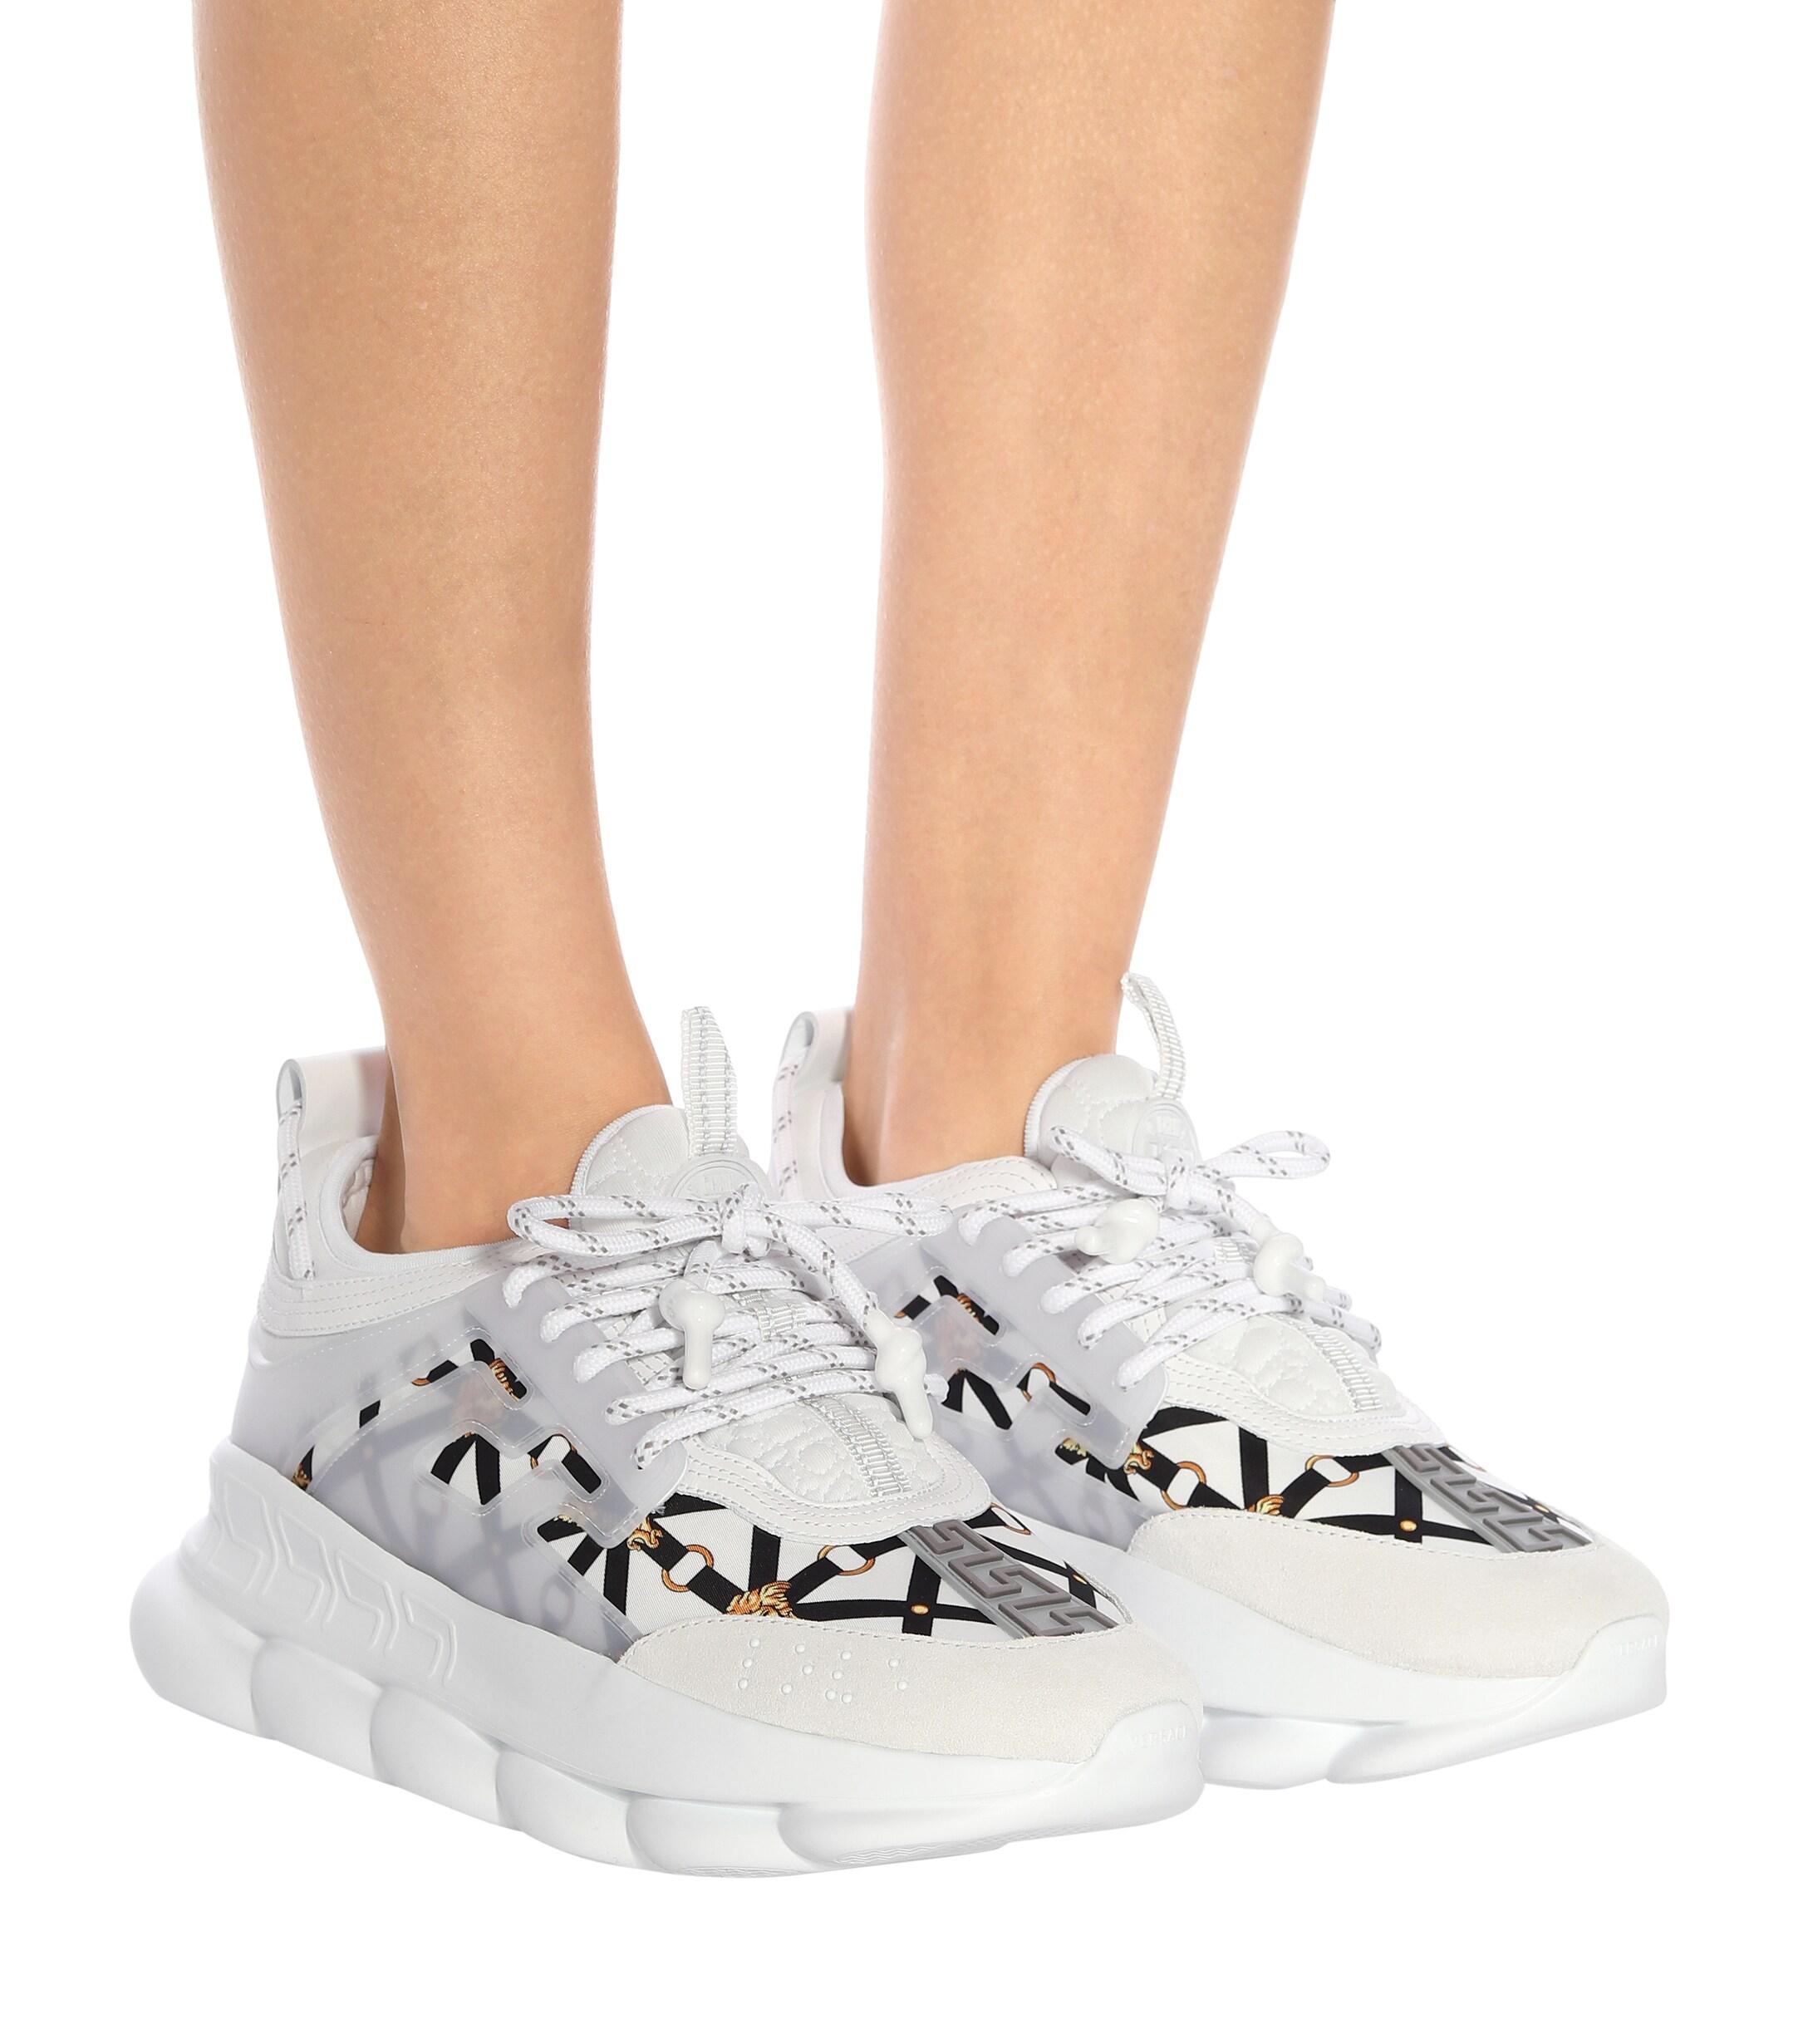 Versace Synthetic Chain Reaction 2 Sneakers in Black/White (White) - Lyst